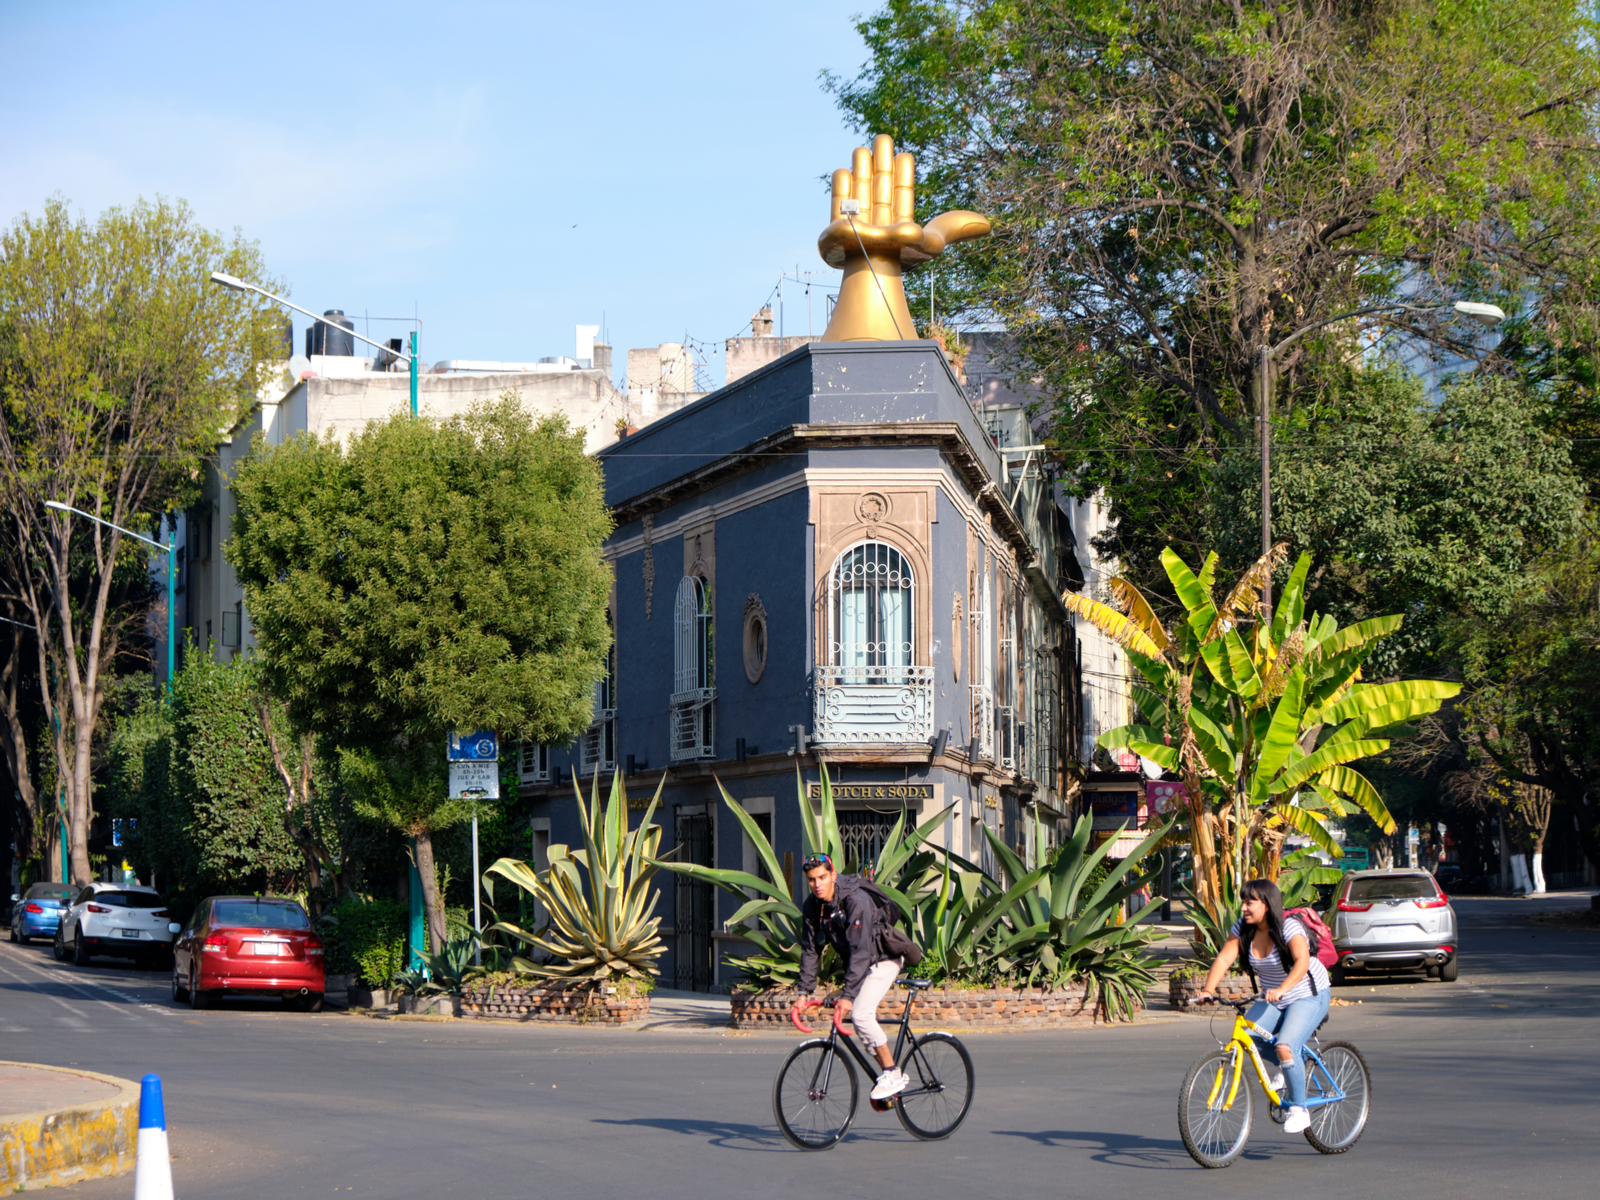 La Condesa neighborhood, one of Mexico City's best parts of town